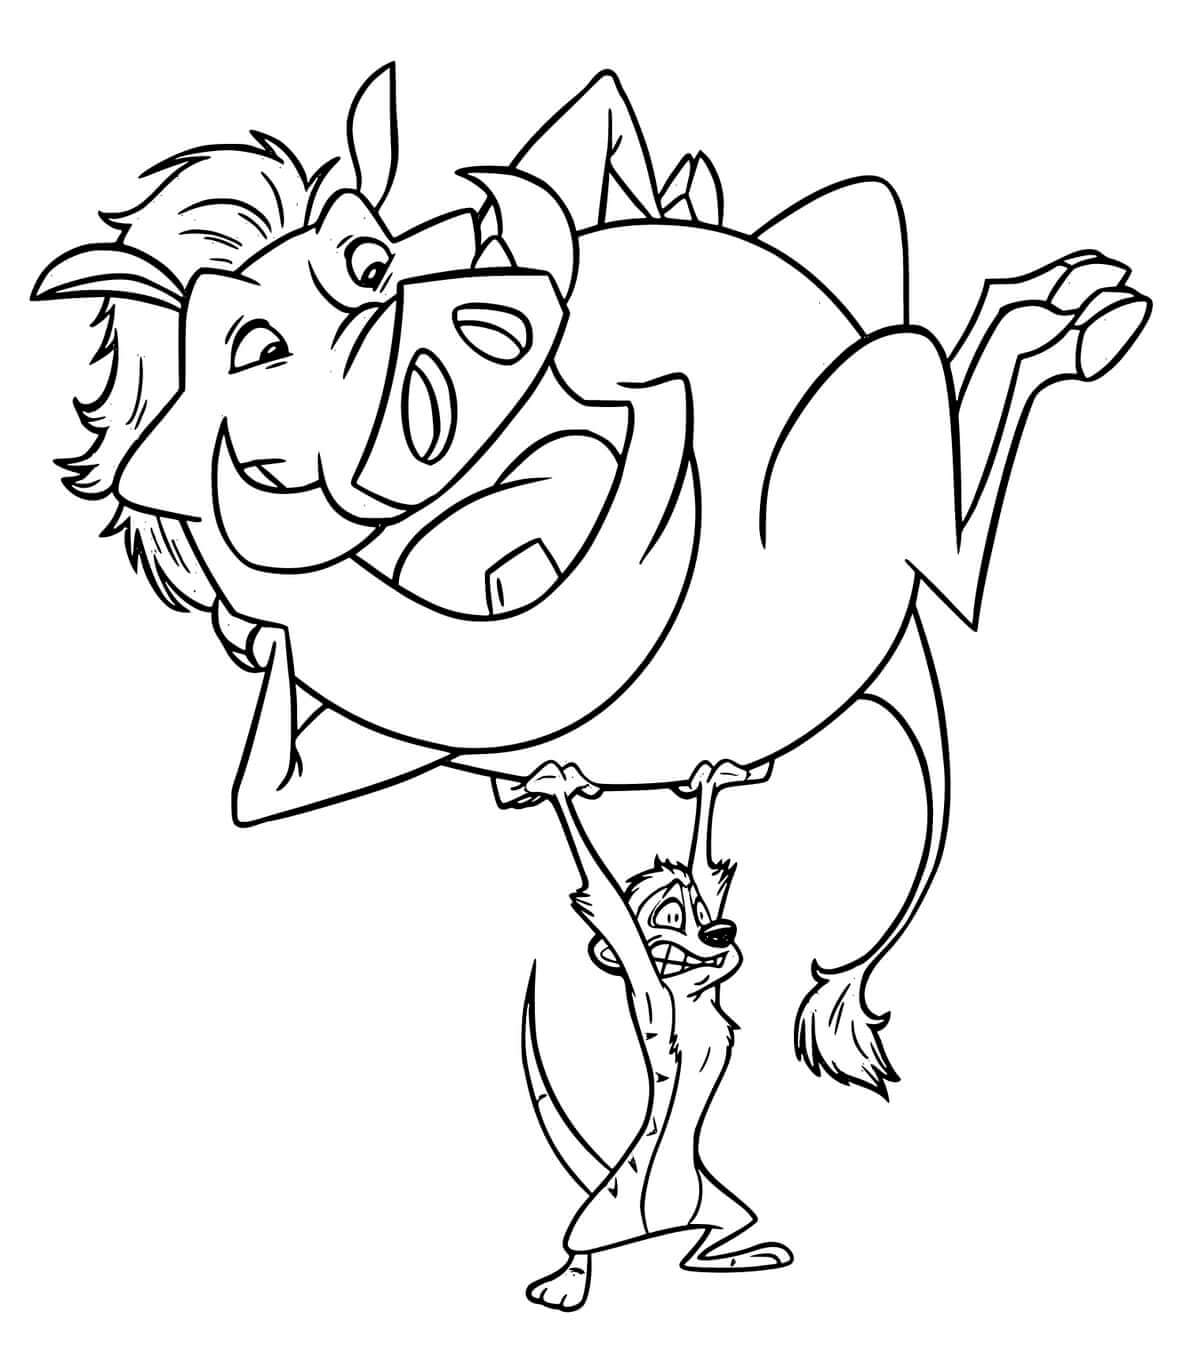 Funny Timon And Pumbaa coloring page - Download, Print or Color Online ...